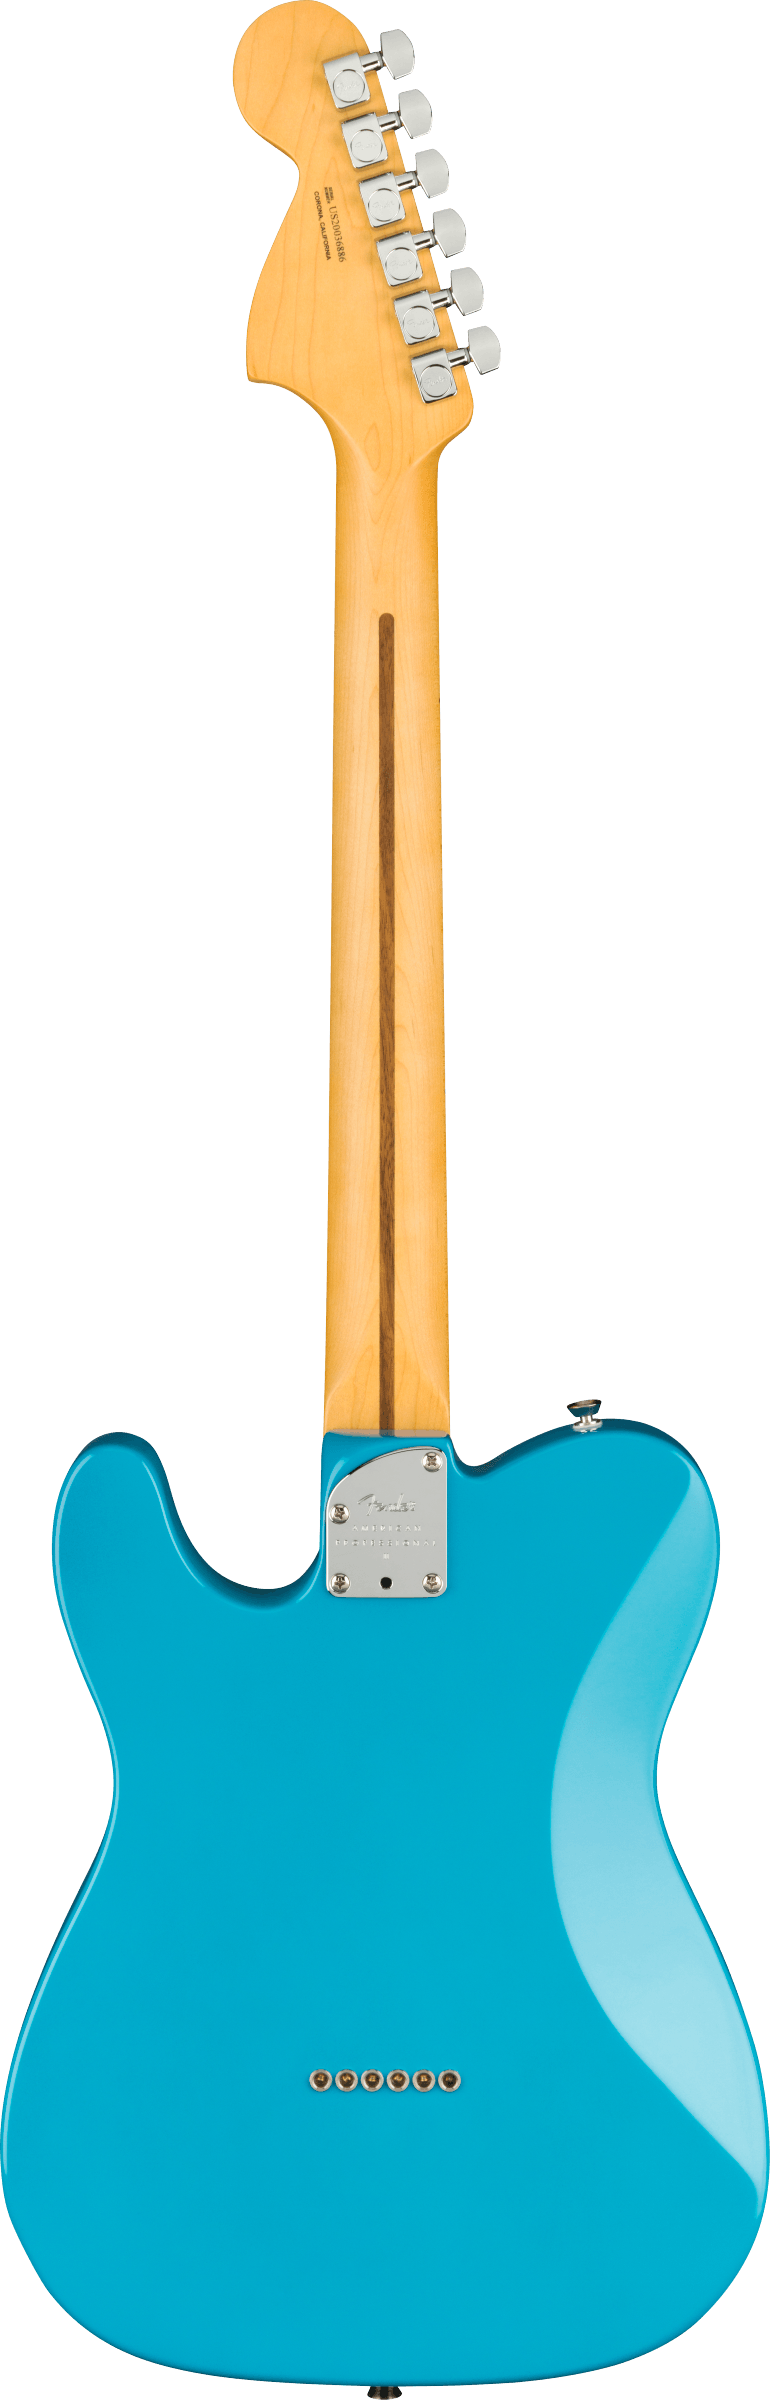 Back of Fender American Professional II Telecaster Deluxe MP Miami Blue.